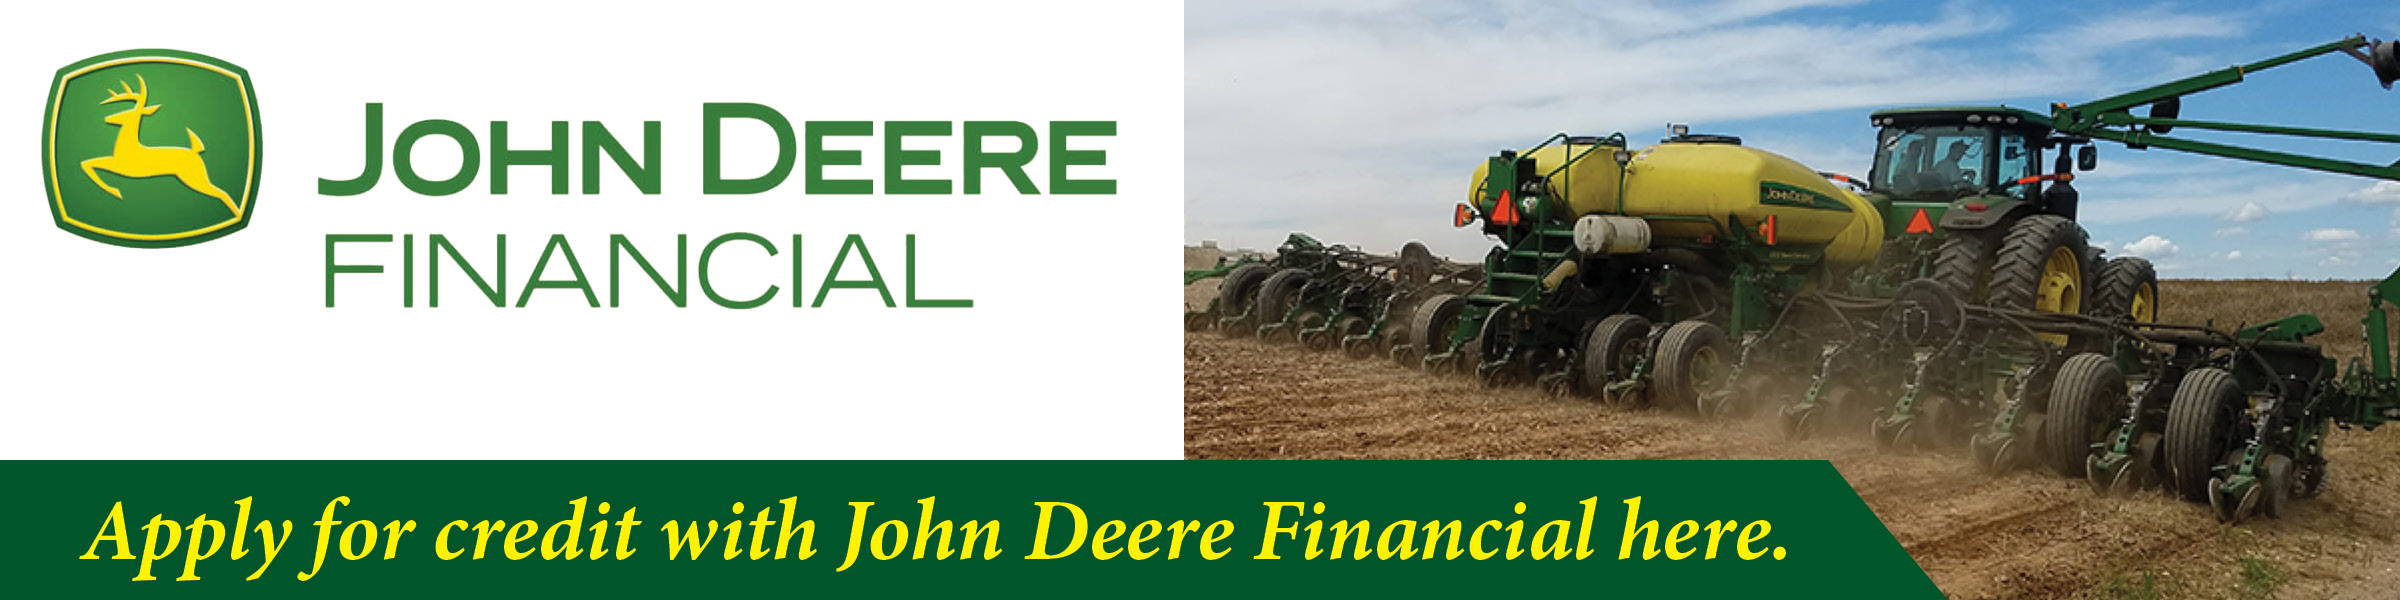 crops, agronomy, The Mill, John Deere Financial